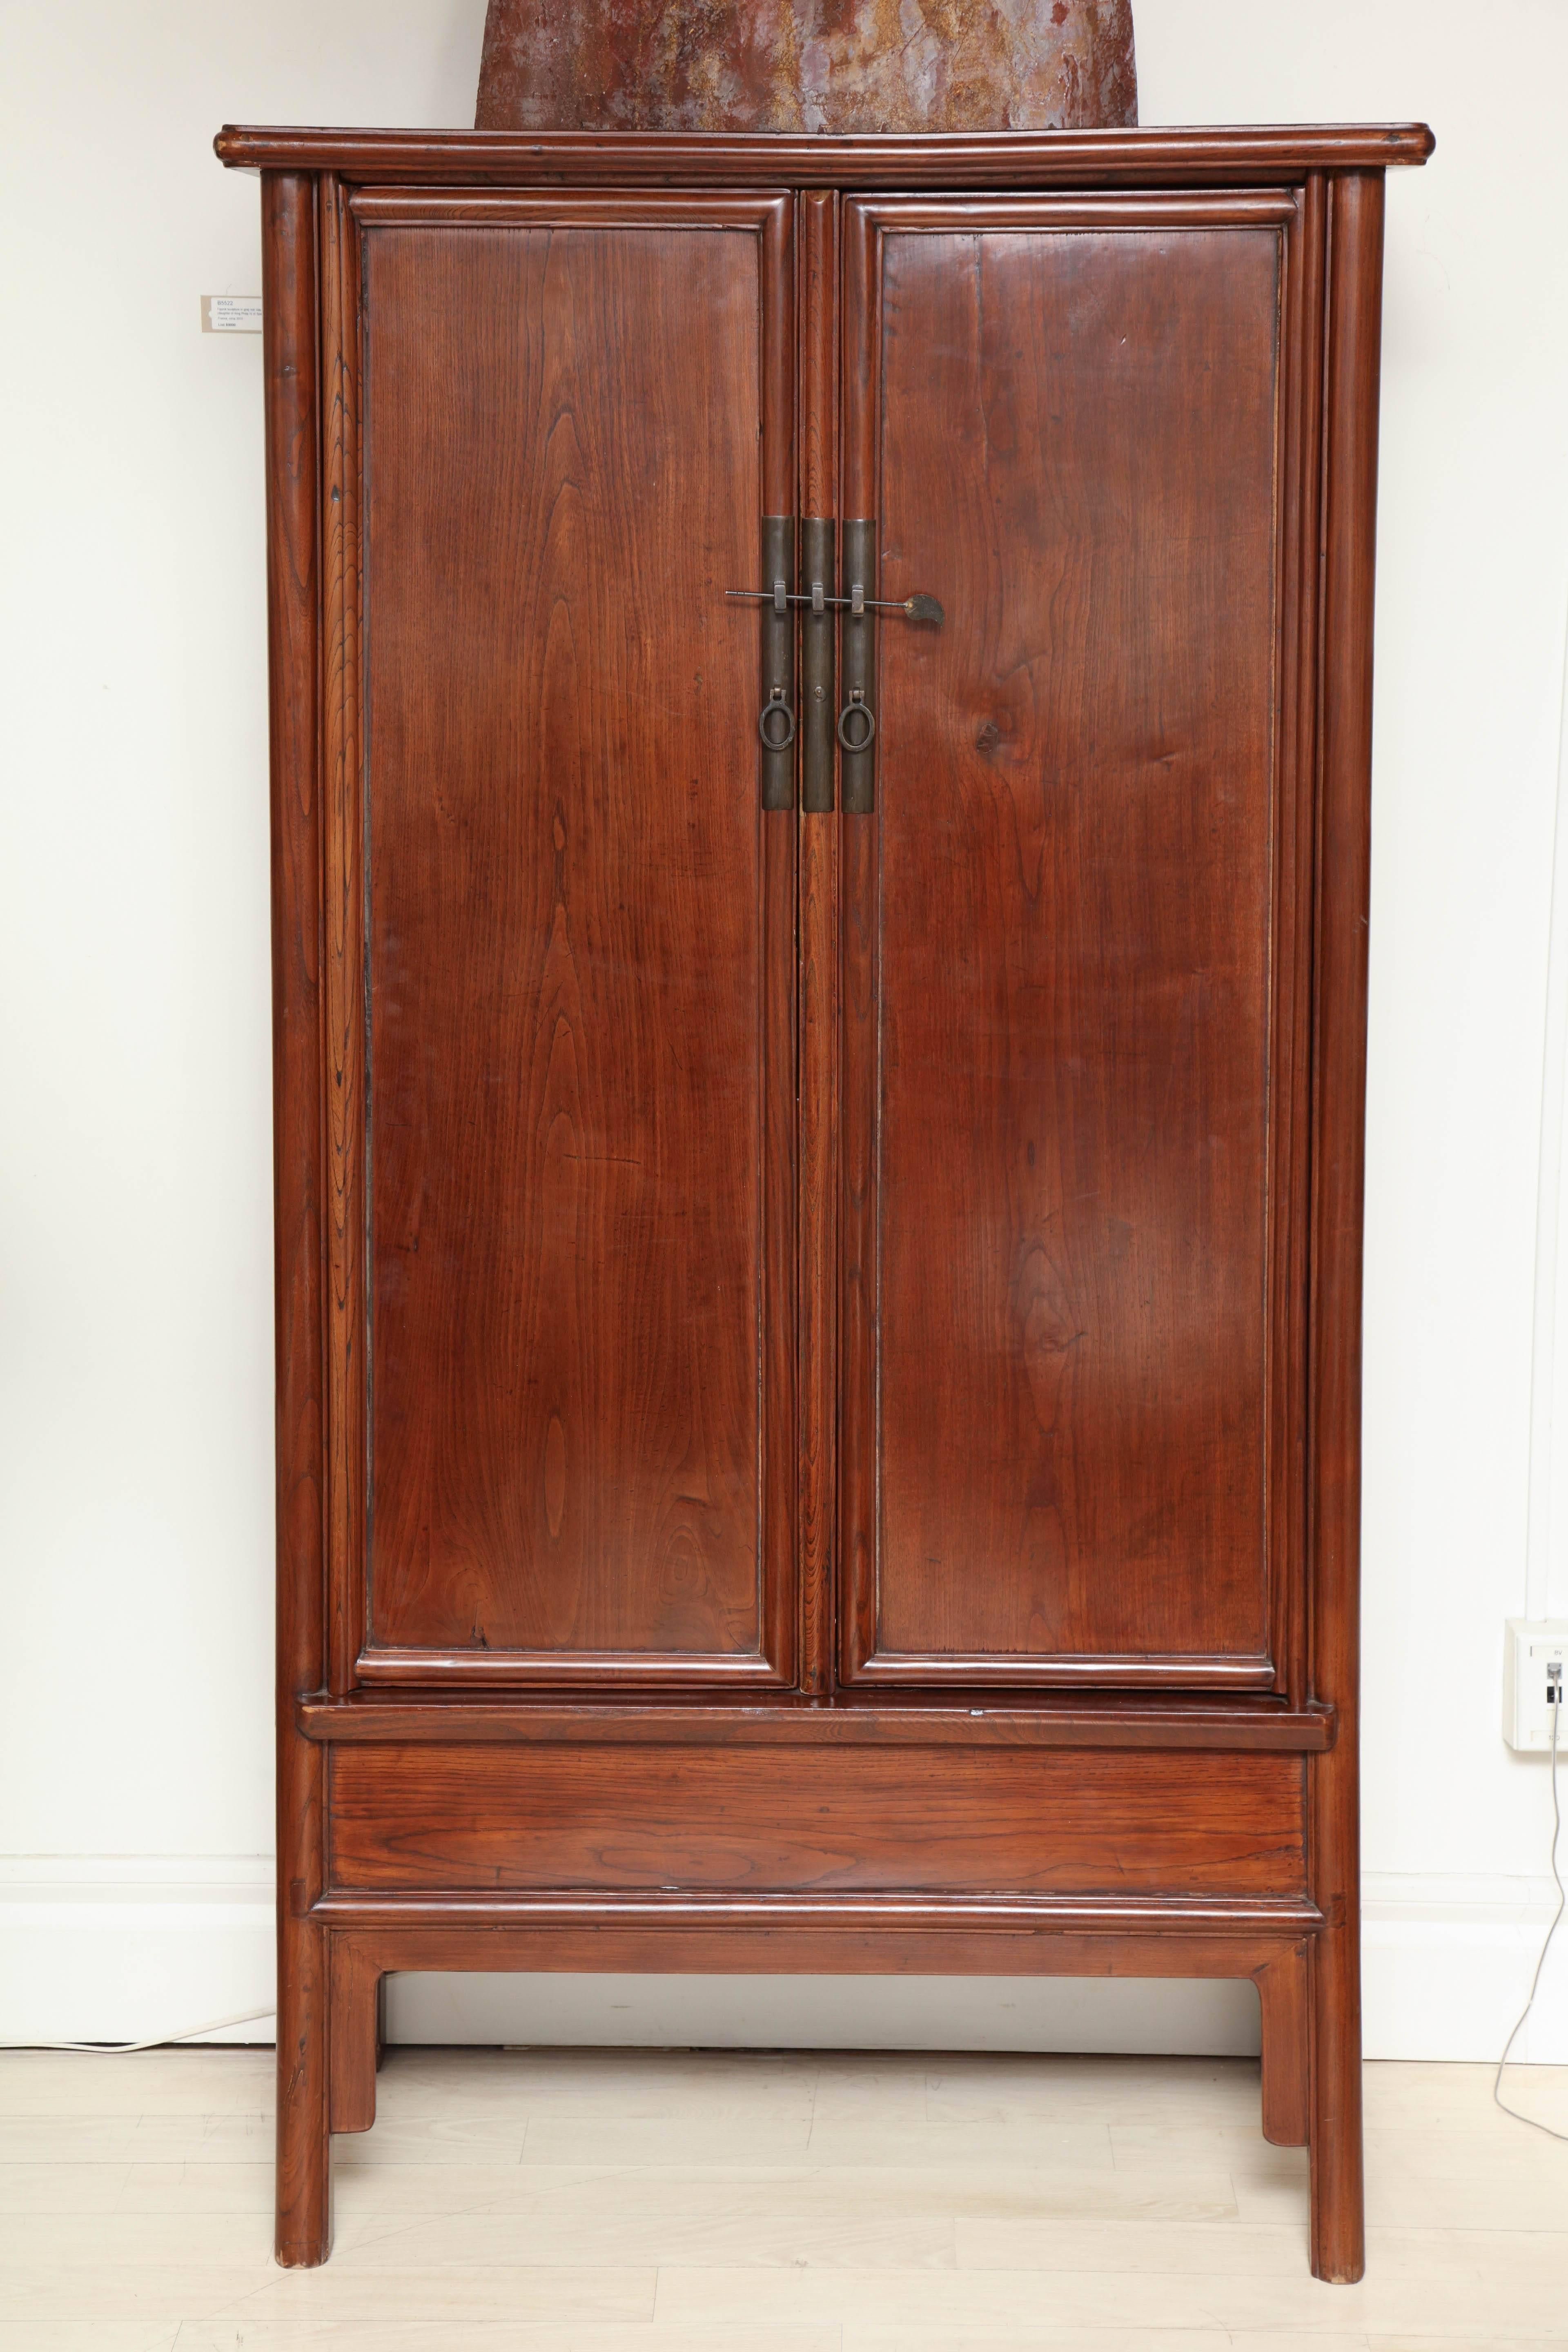 Early 19th century Chinese elm two door armoire with inner shelving, two drawers and secret compartment.



Available to see in our NYC Showroom 
BK Antiques
306 East 61st St. 2nd fl.
New York, NY 10065